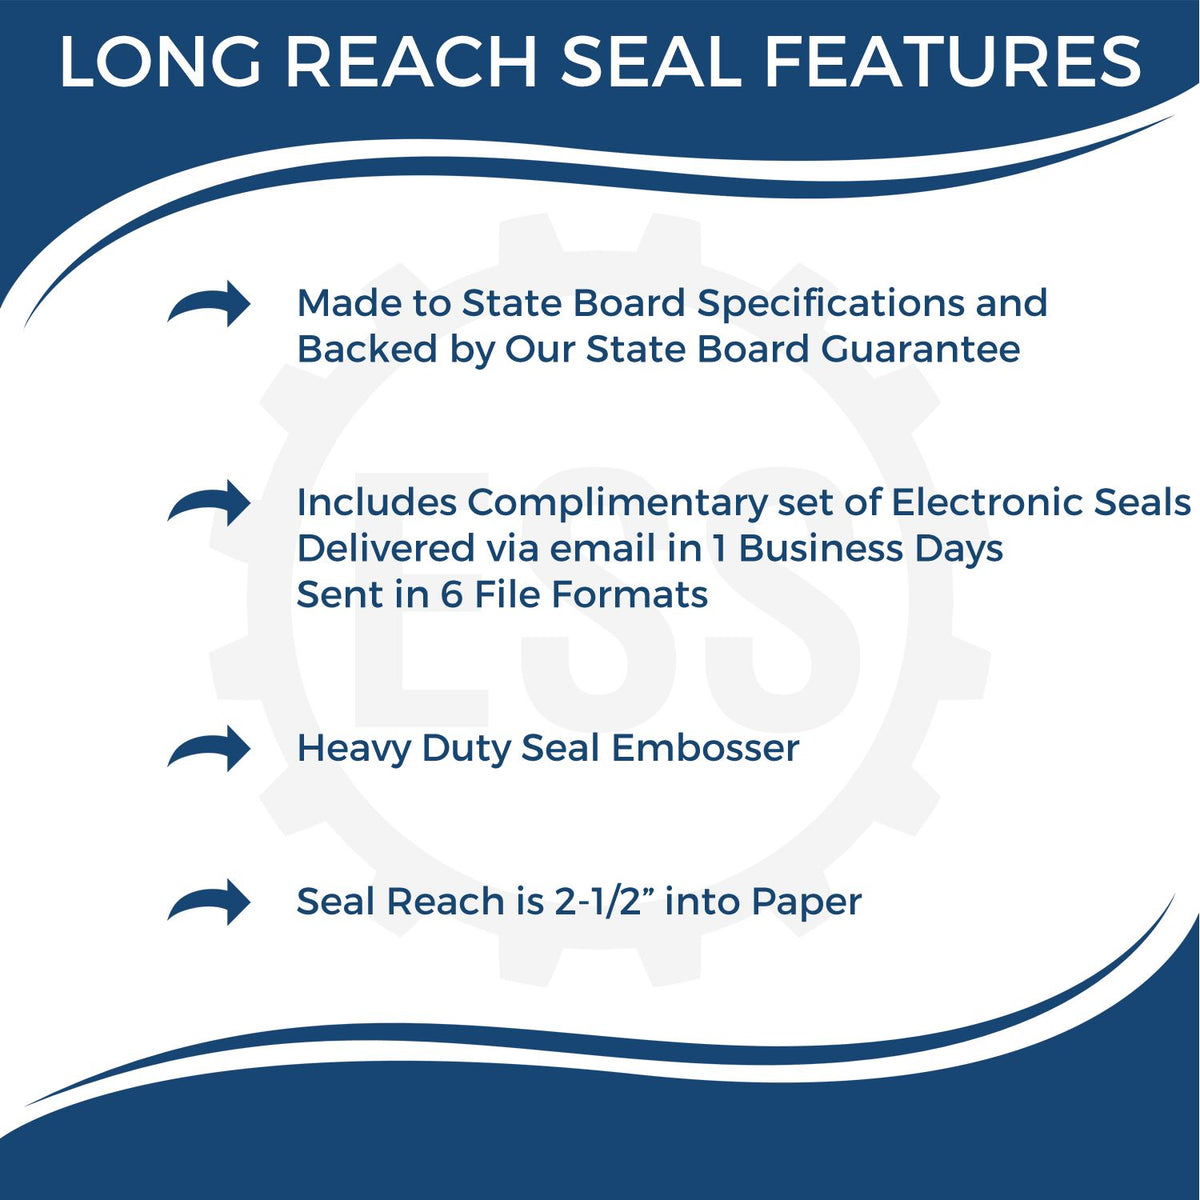 A picture of an infographic highlighting the selling points for the Long Reach Indiana Geology Seal